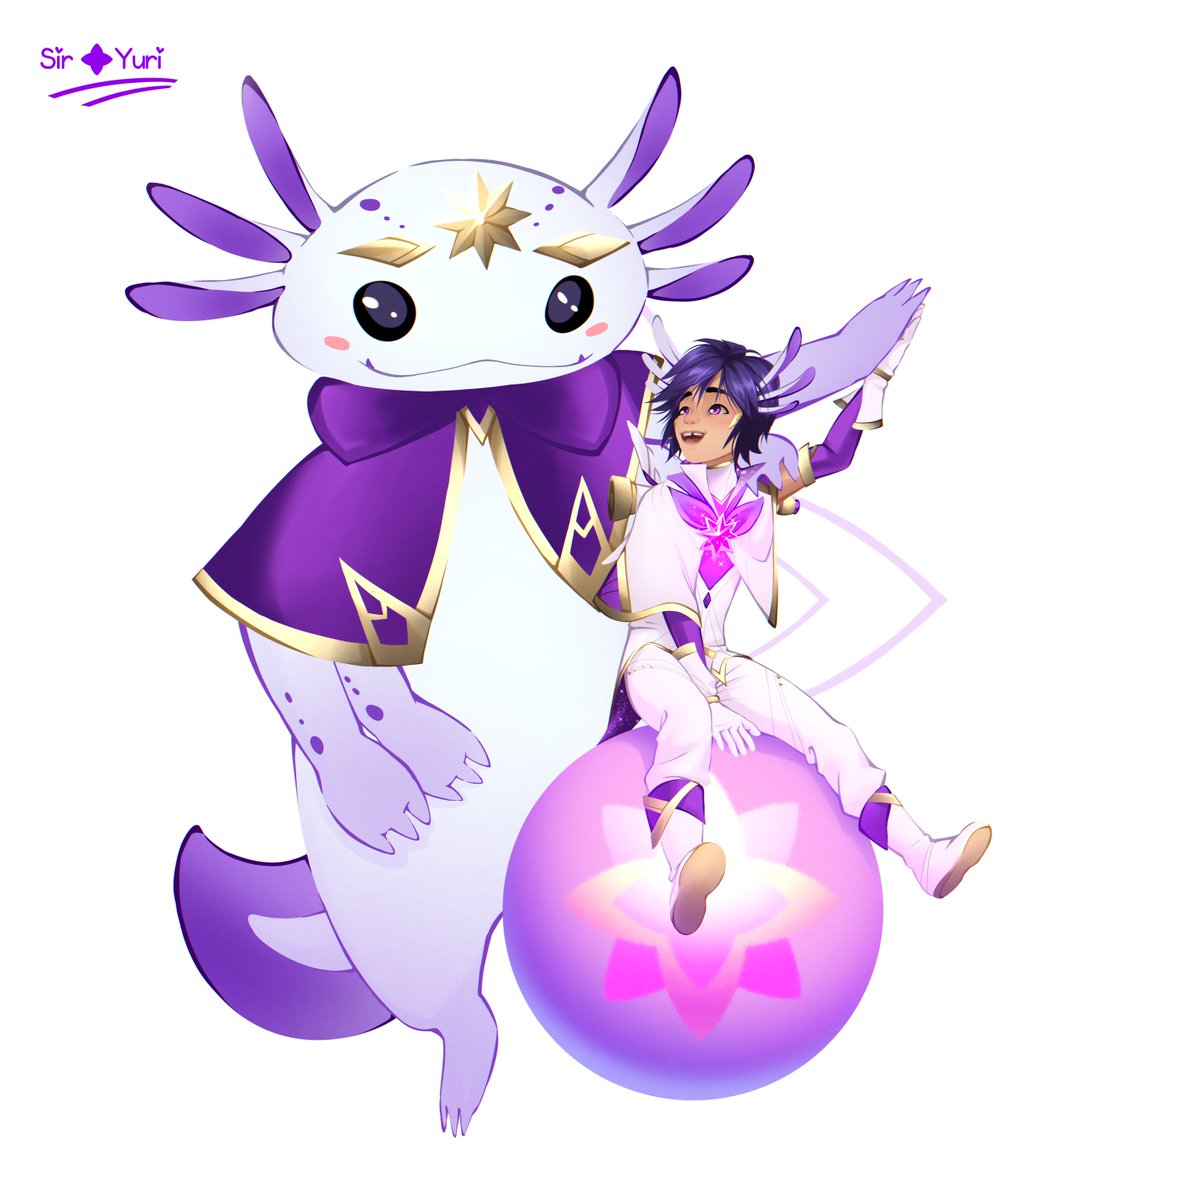 ✨ STAR GUARDIAN NUNU & WILLUMP ✨

Nunu was part of a team before lost all of them. He was alone when a giant axolotl named Willump chose him to protect, now with they new friends, Nunu once again feels like he has a family.

#StarGuardian #LeagueofLegends